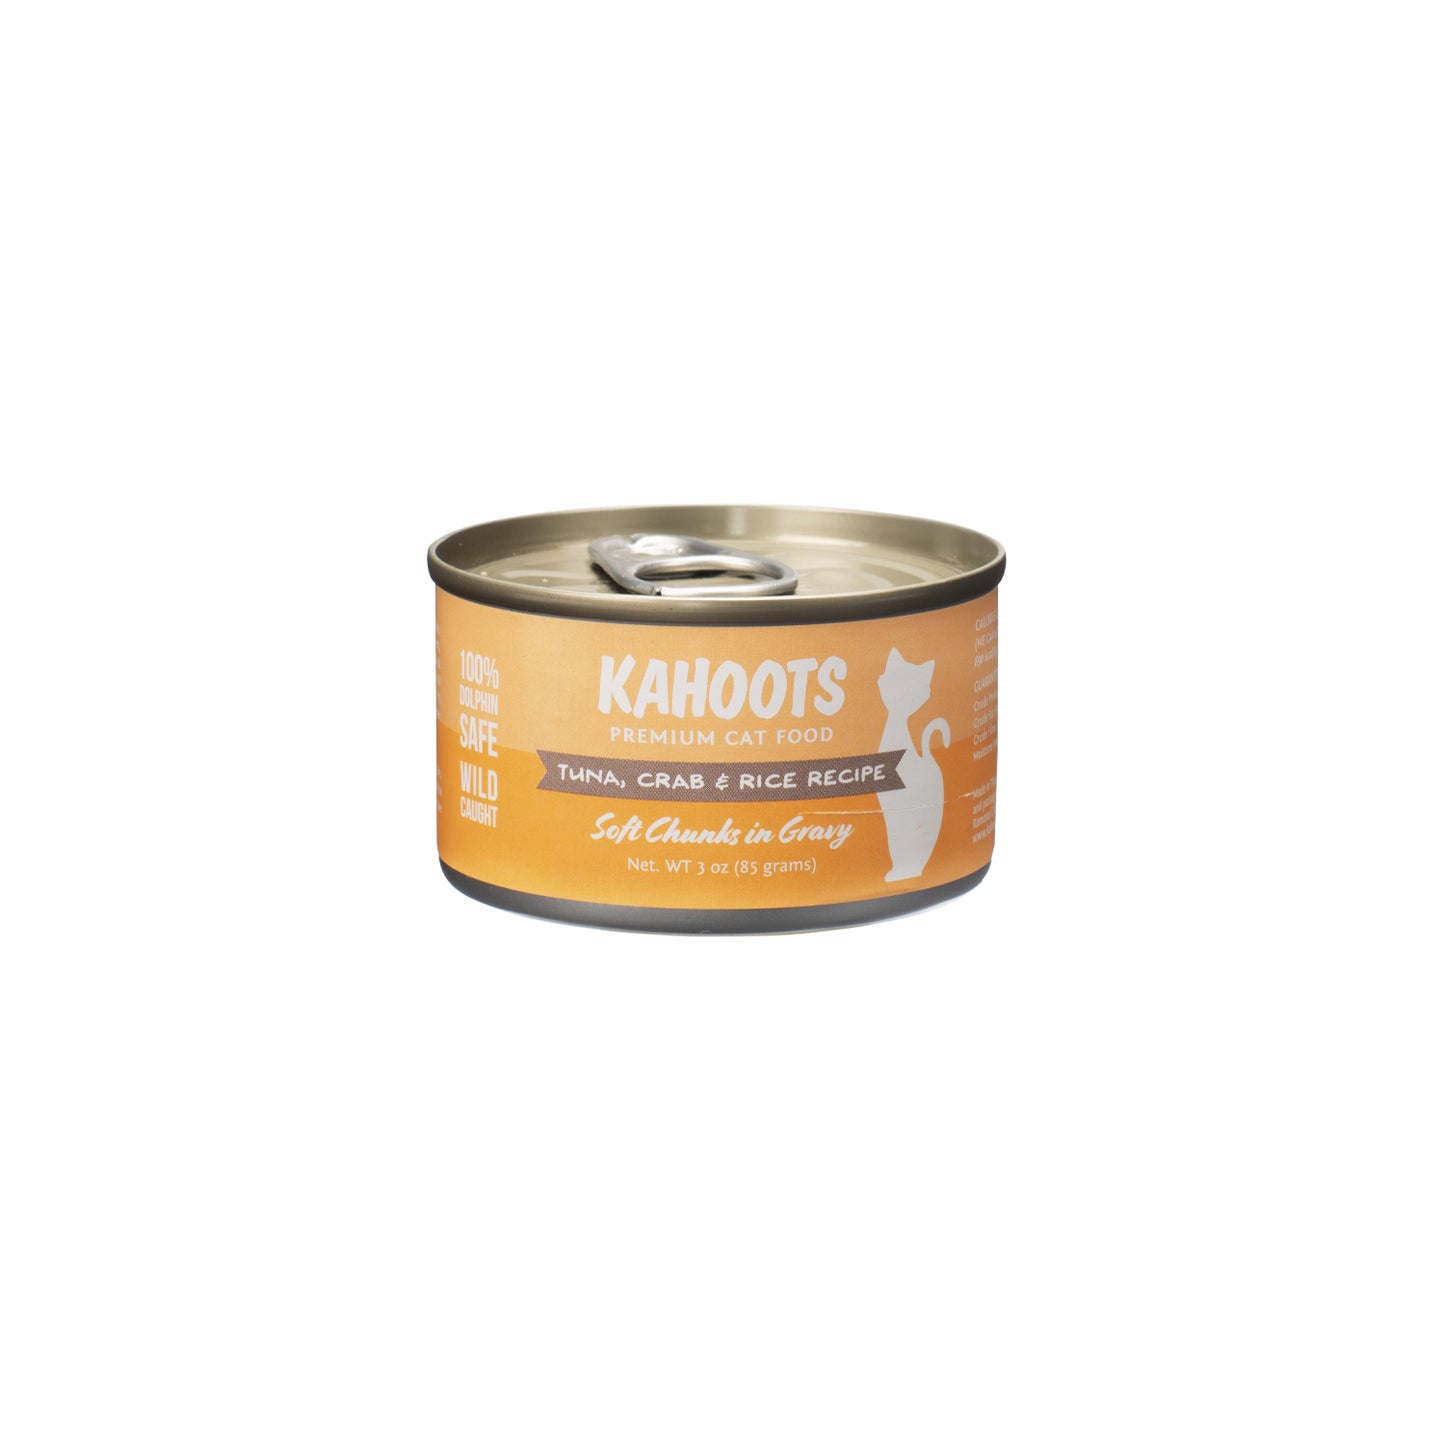 Tuna, crab, and rice wet cat food. Picture of a white cat over a orange background on label